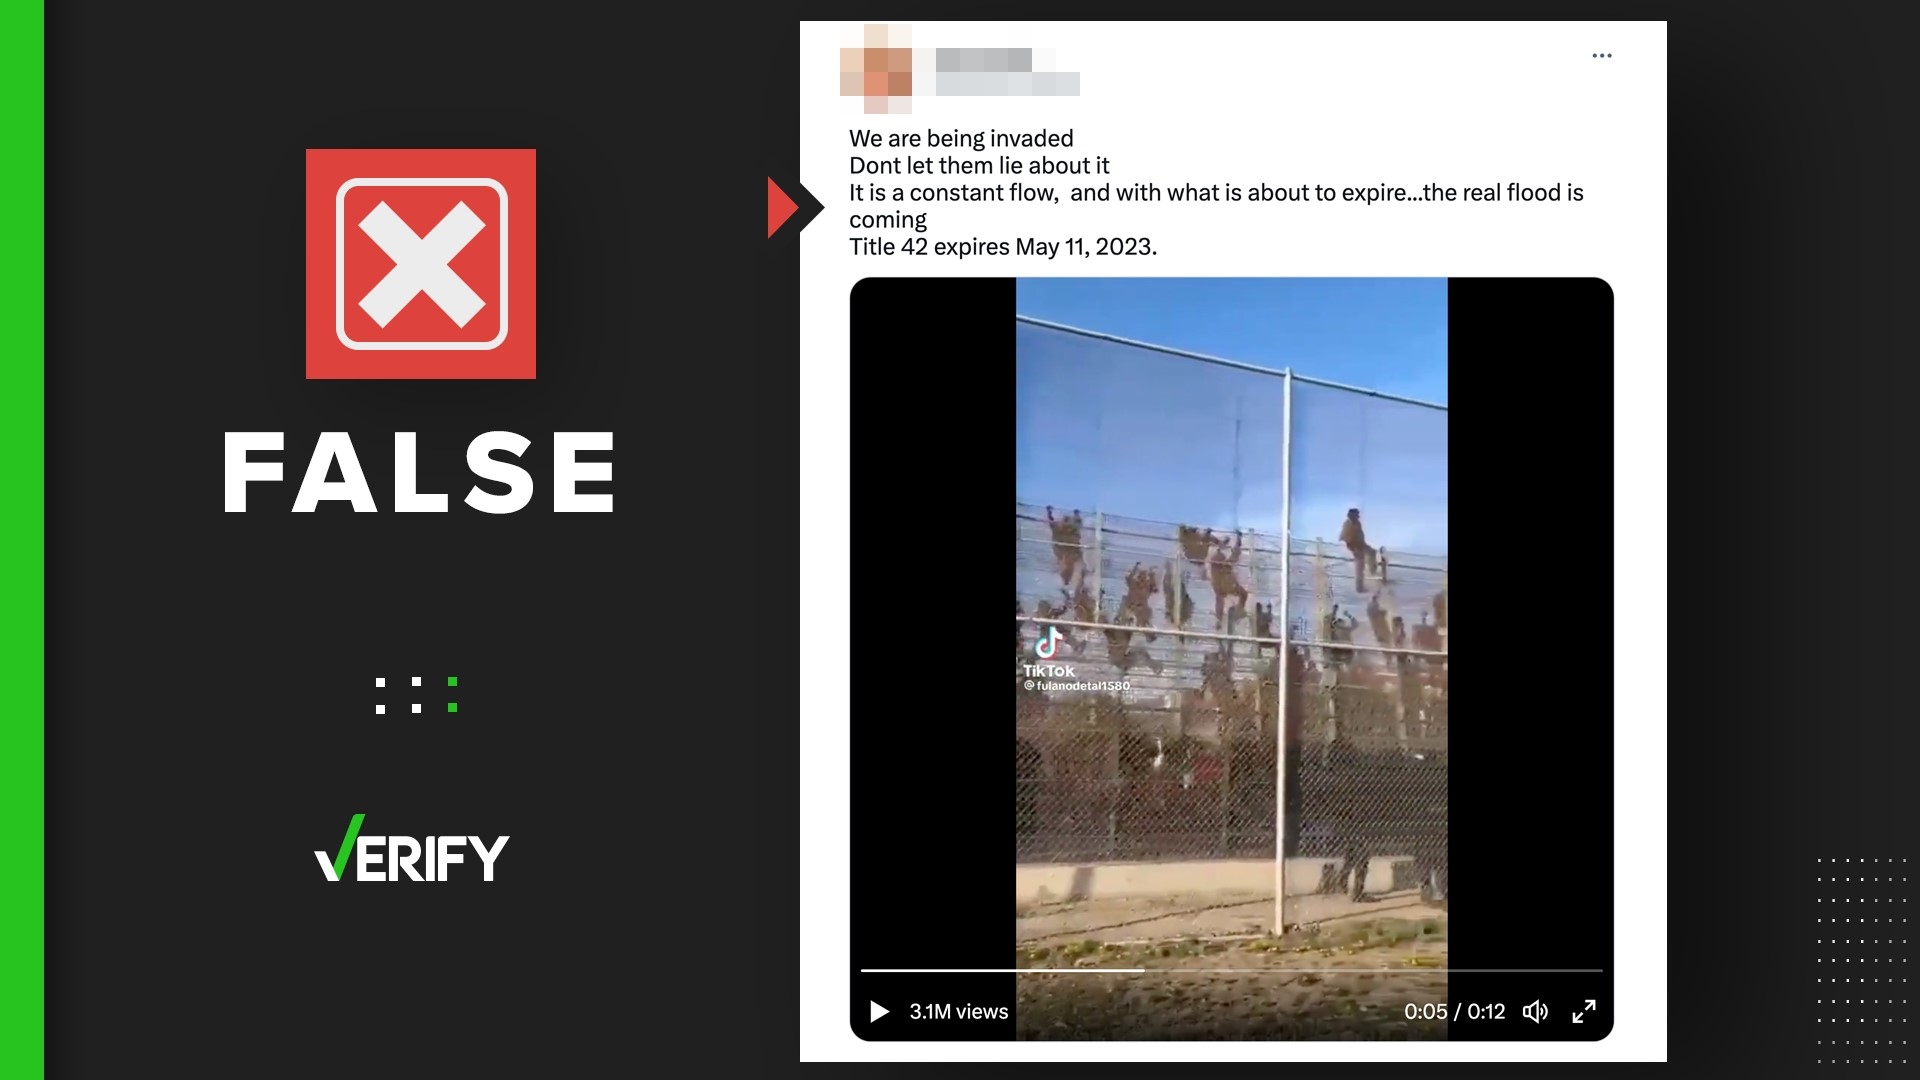 A viral video that shows people climbing fence is being shared out of context ahead of Title 42's expiration. It was really shot in Melilla, a city in North Africa.